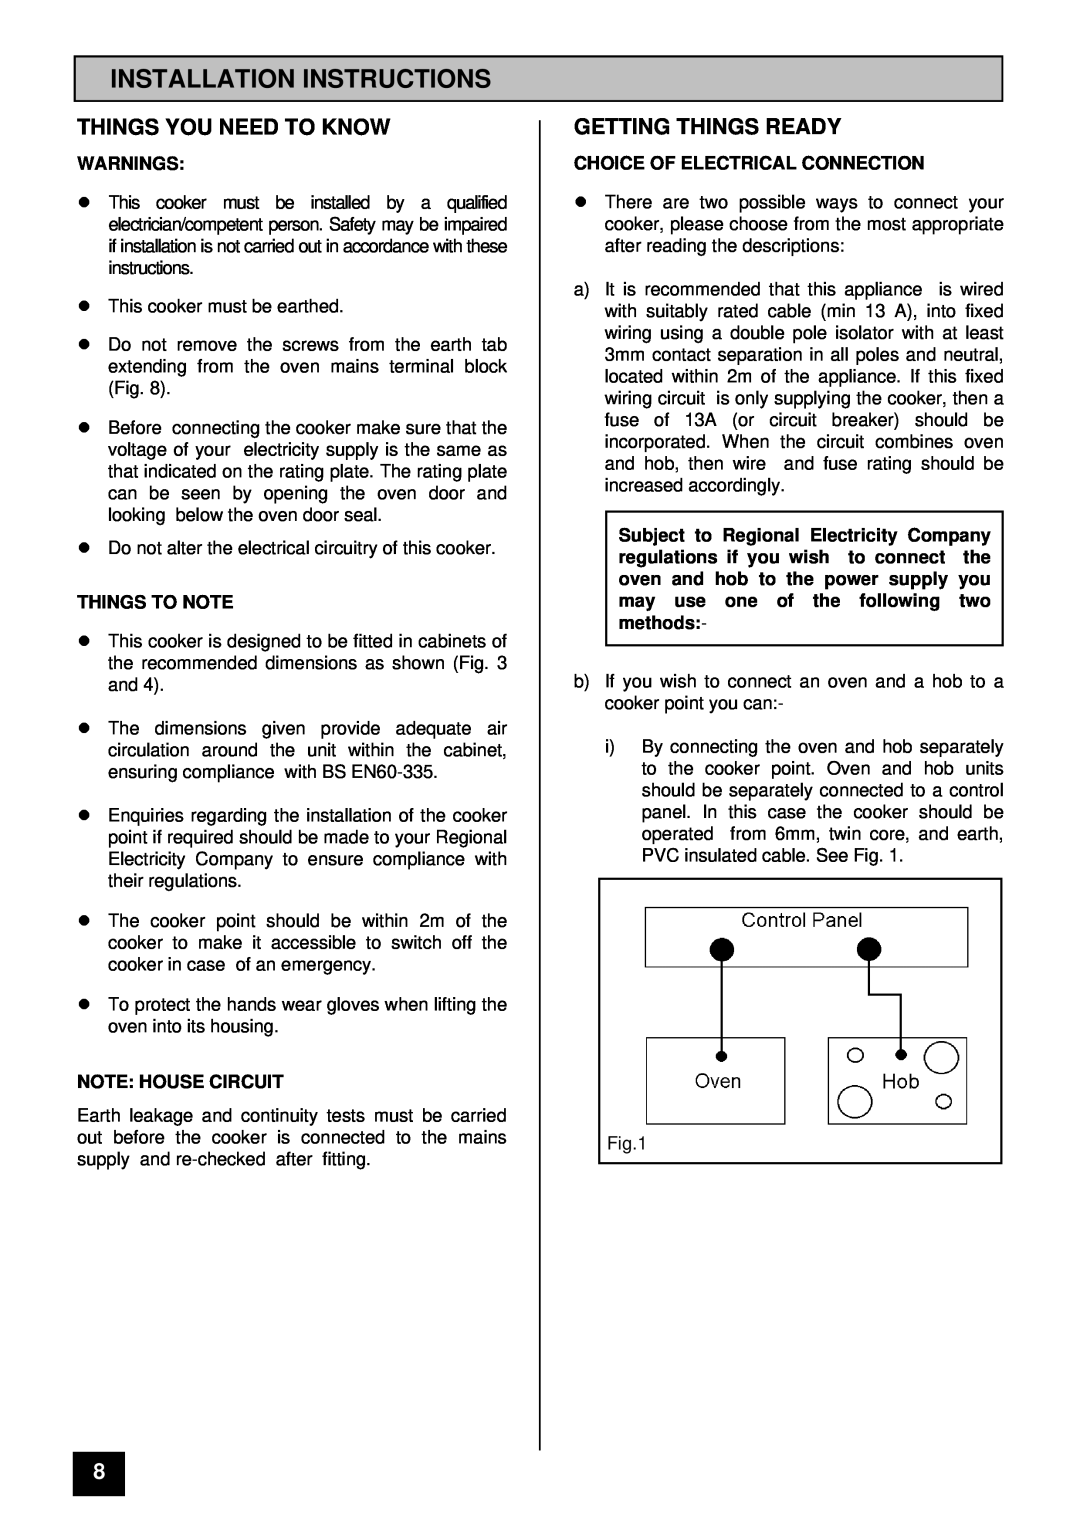 Tricity Bendix SURREY Installation Instructions, Things You Need To Know, Getting Things Ready, Warnings, Things To Note 